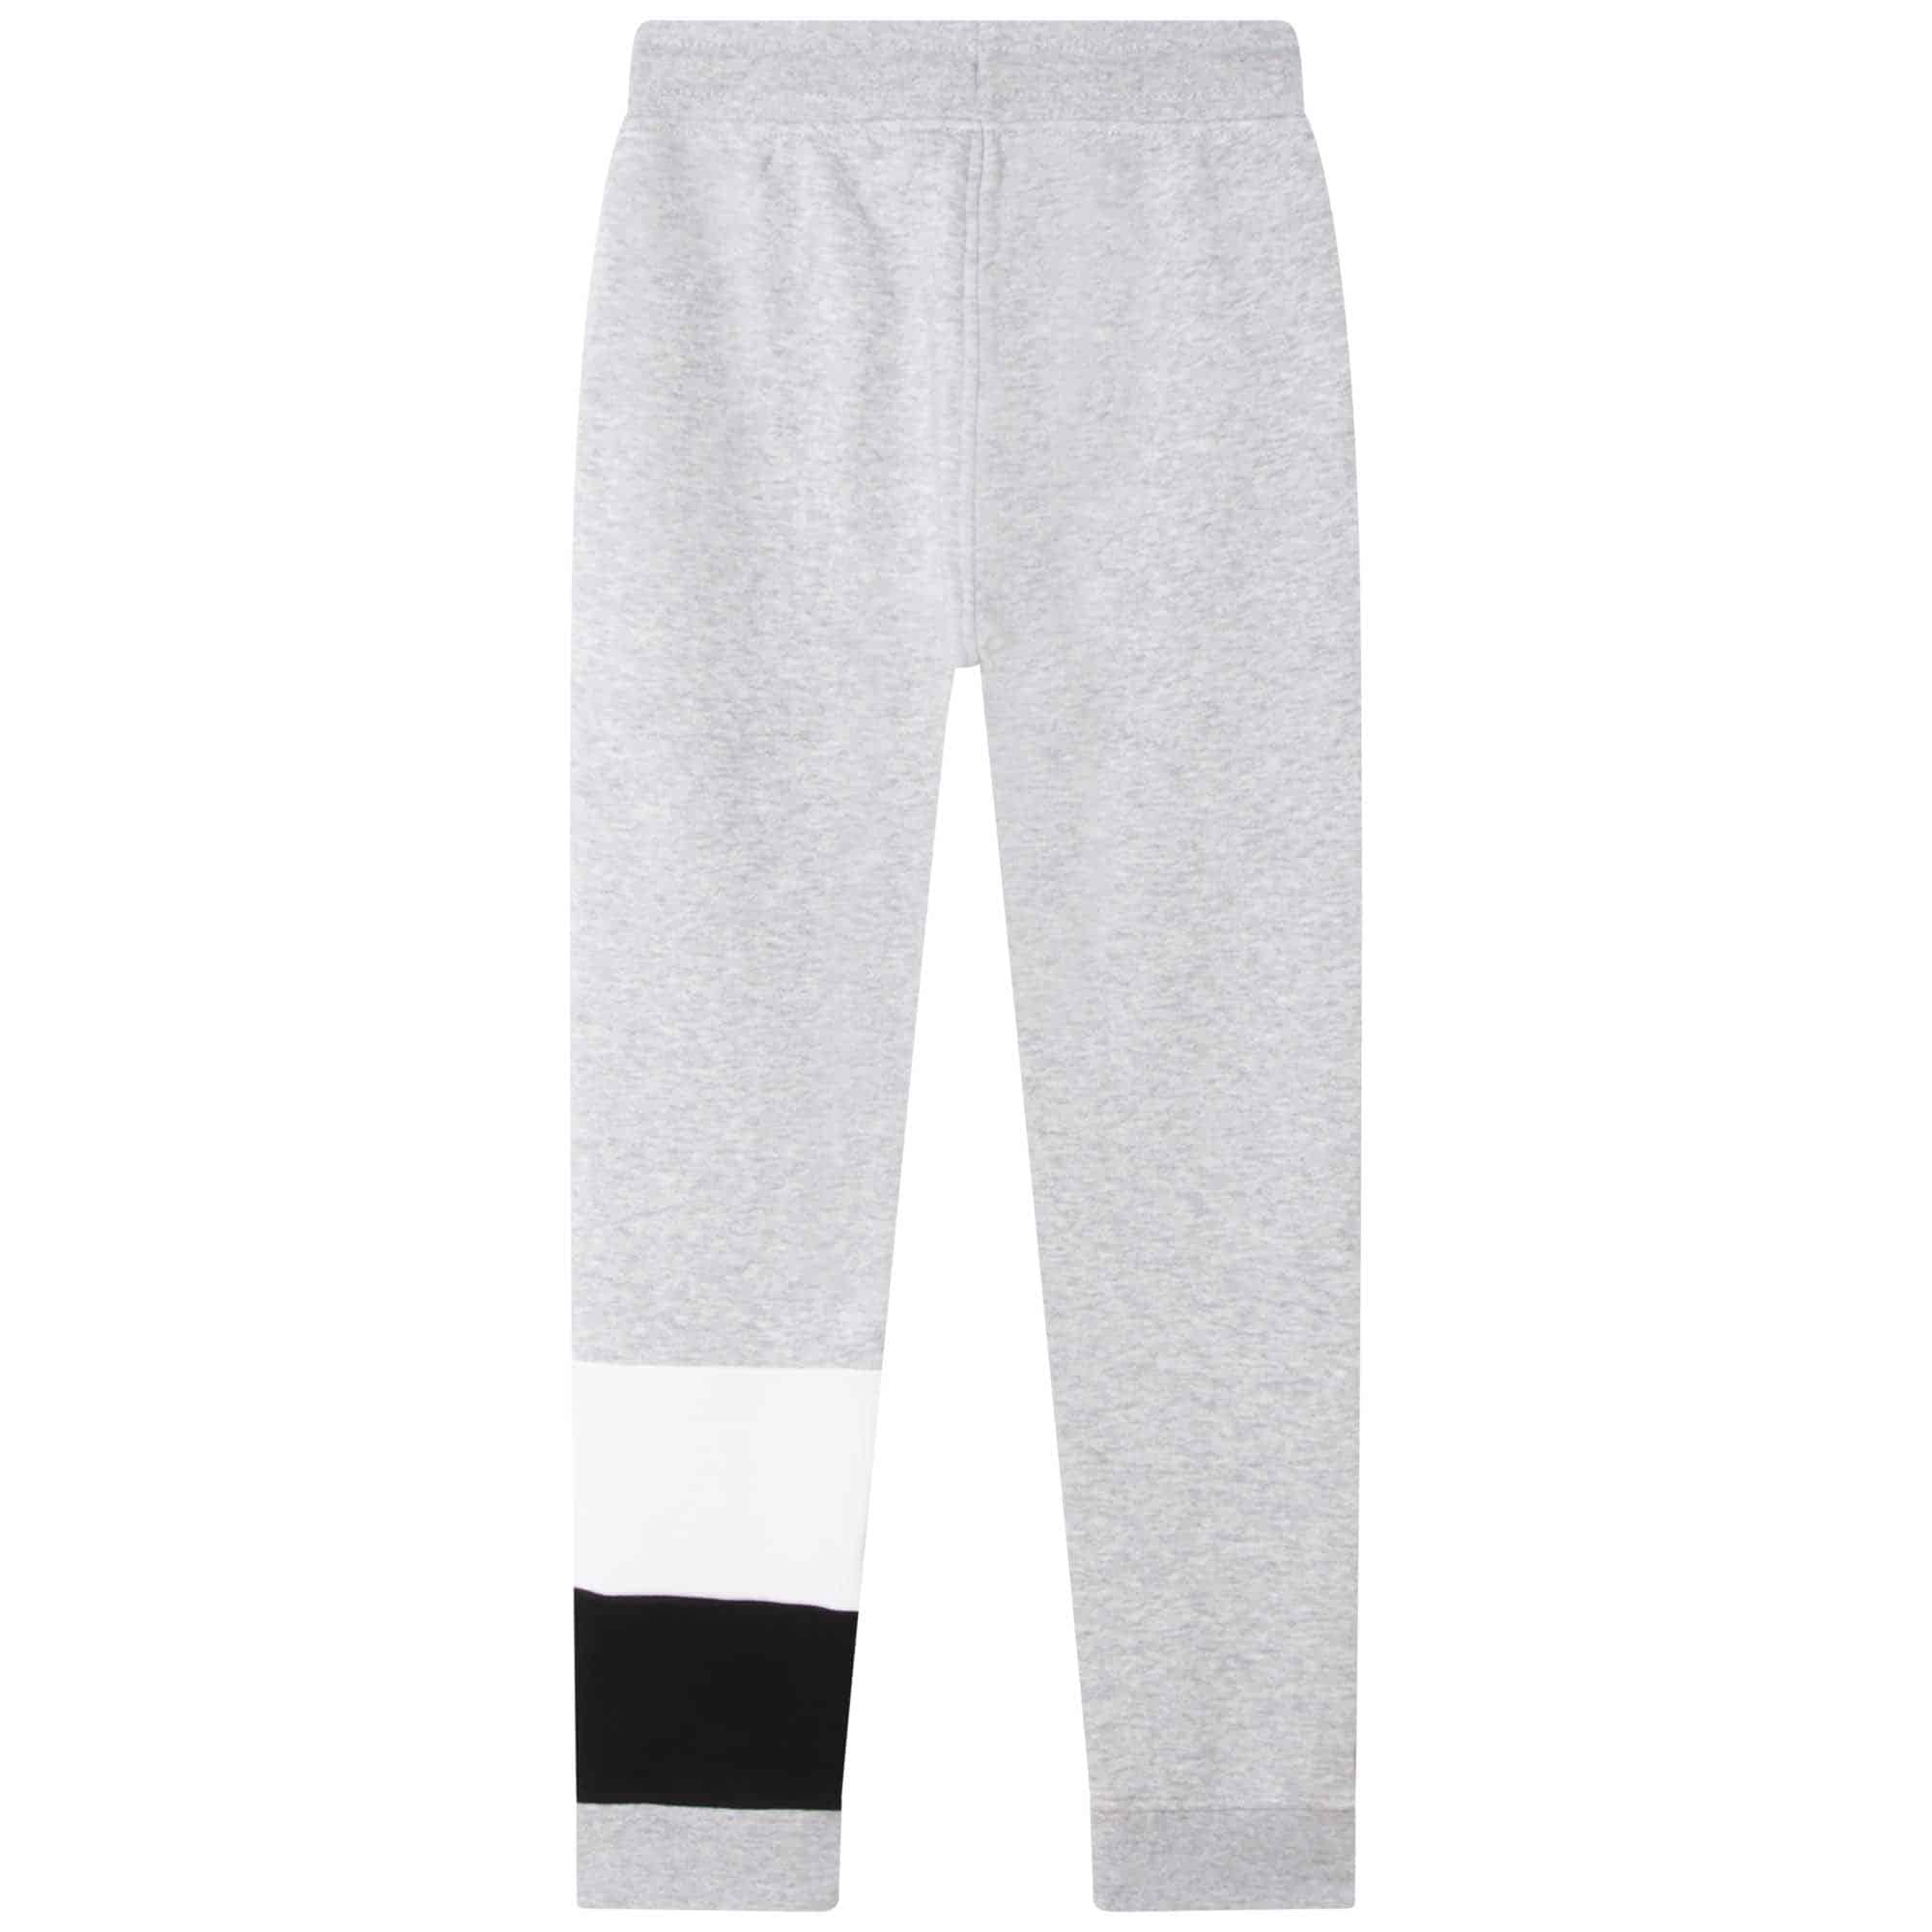 Boss boys grey tracksuit bottoms with large black logo back view